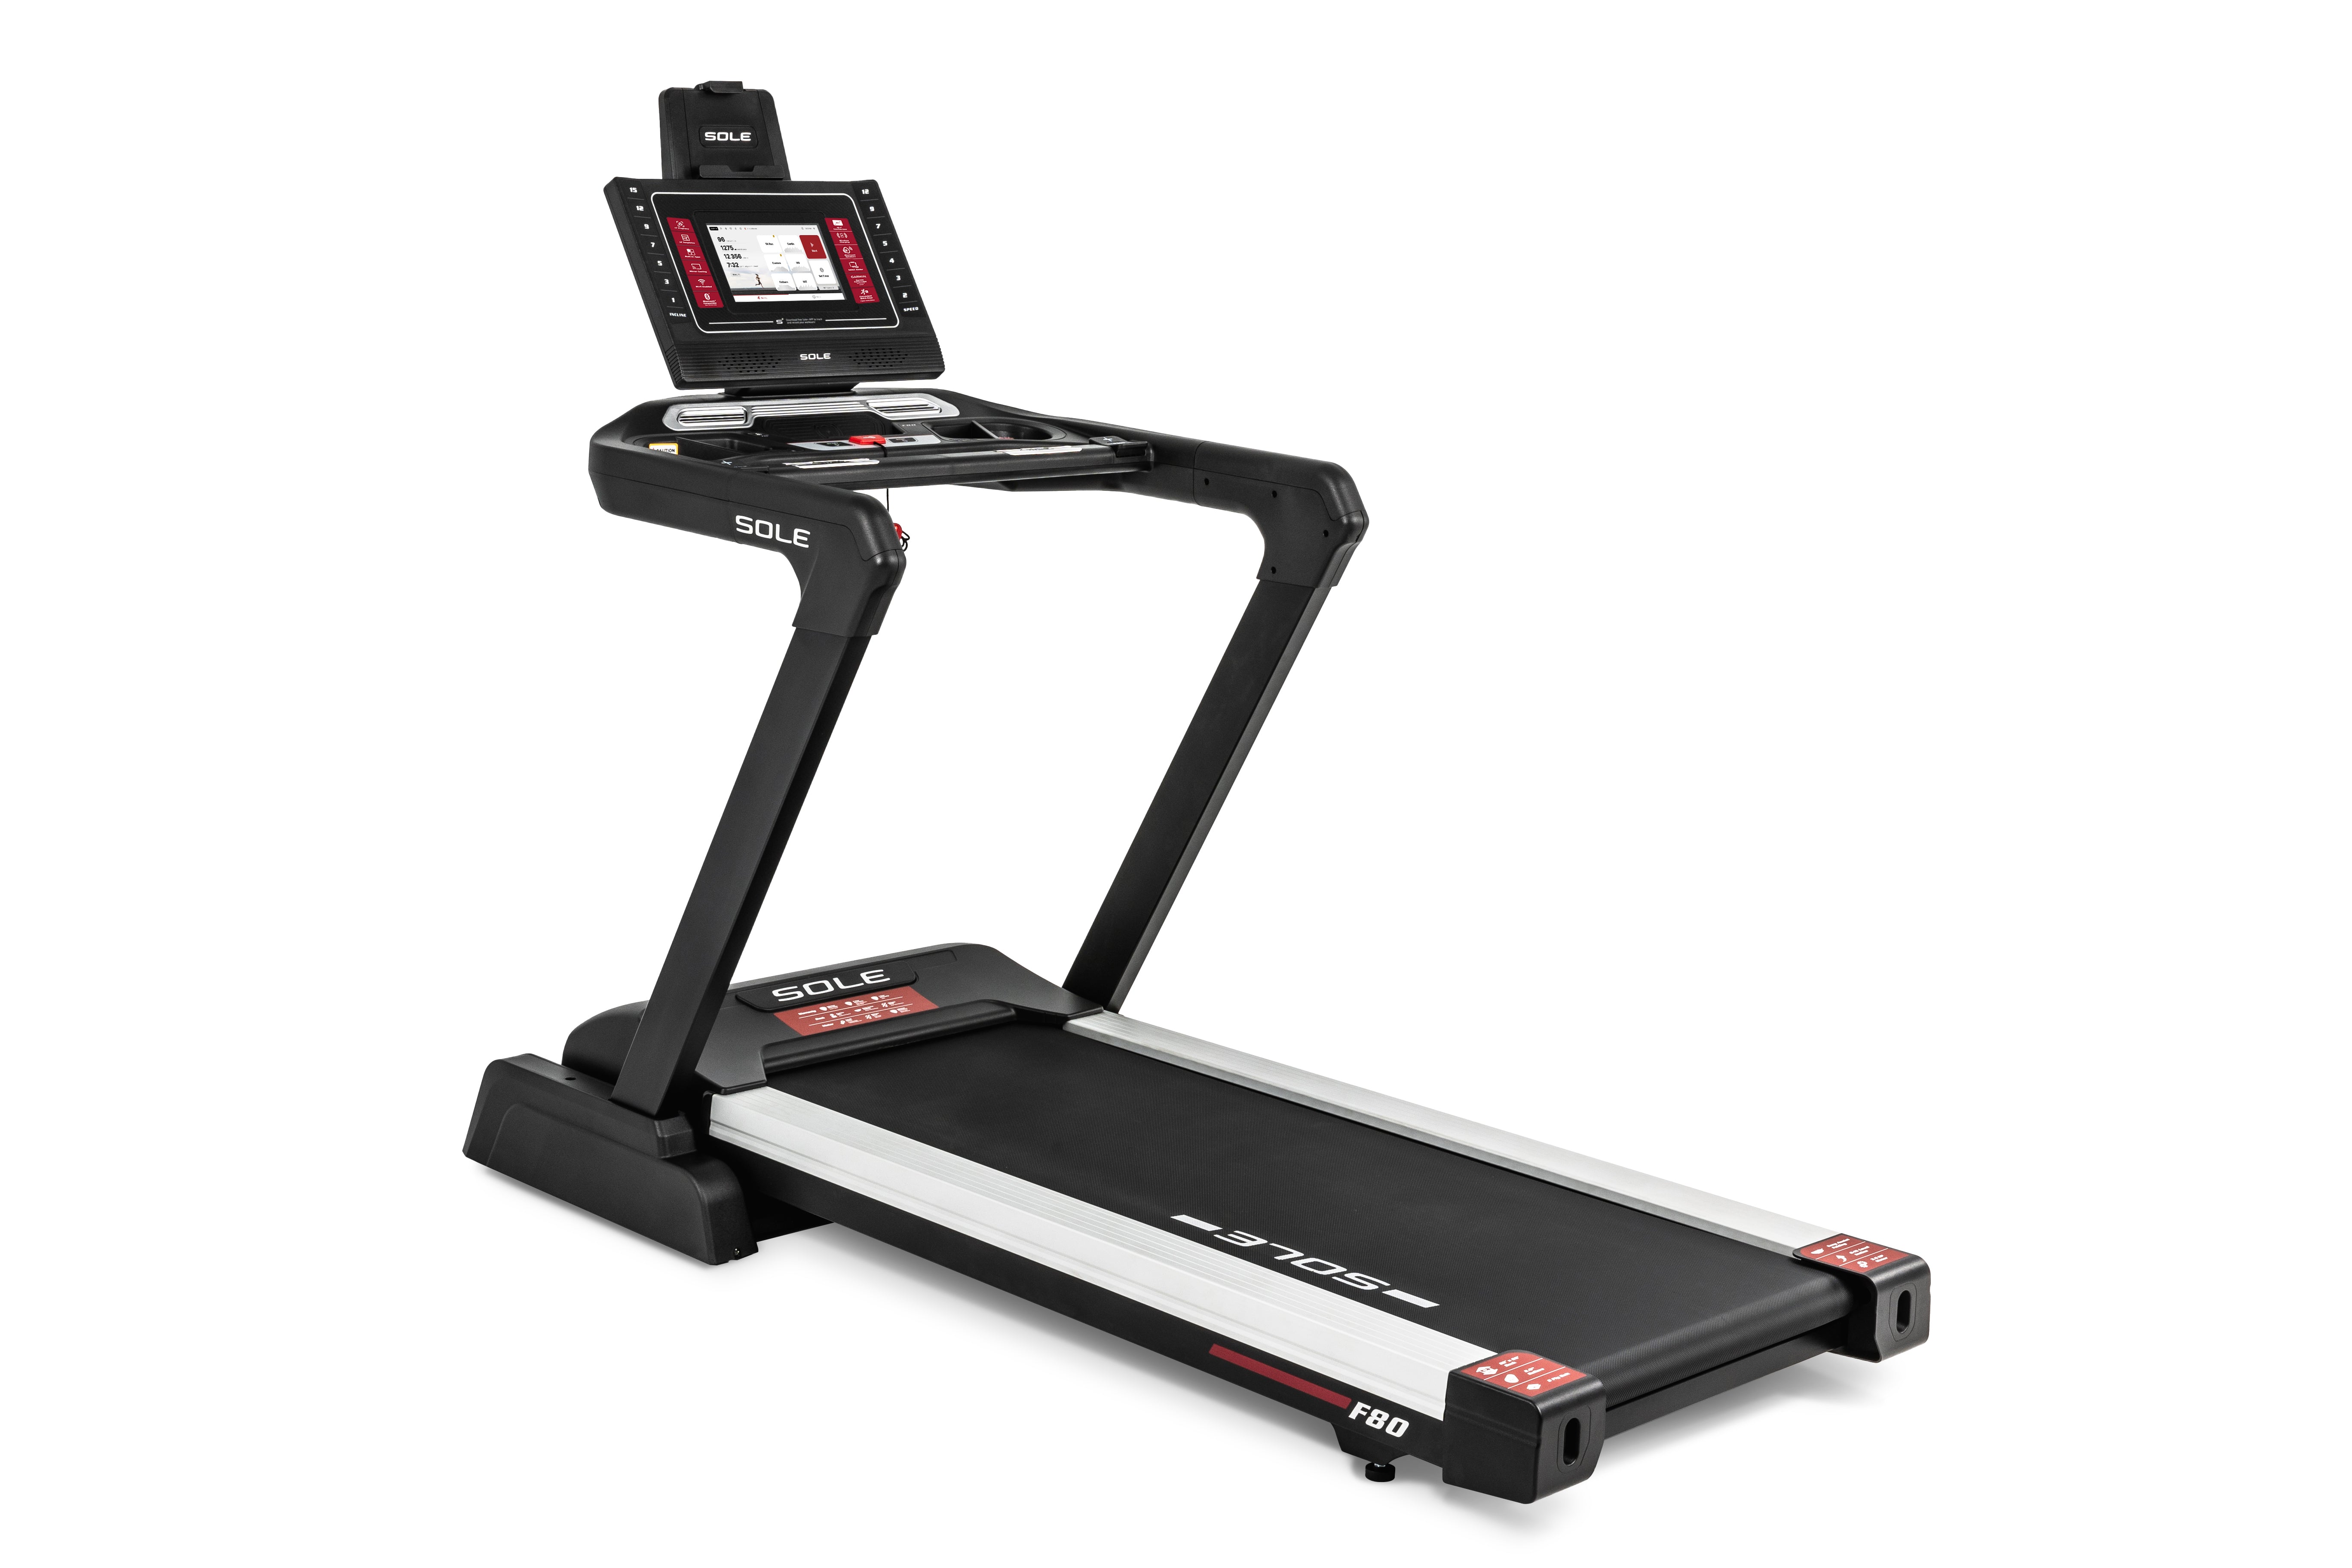 Sole F80 treadmill in an unfolded position, showcasing its digital touchscreen console, tablet holder, control buttons, and the black running deck with "F80" branding on the sides.